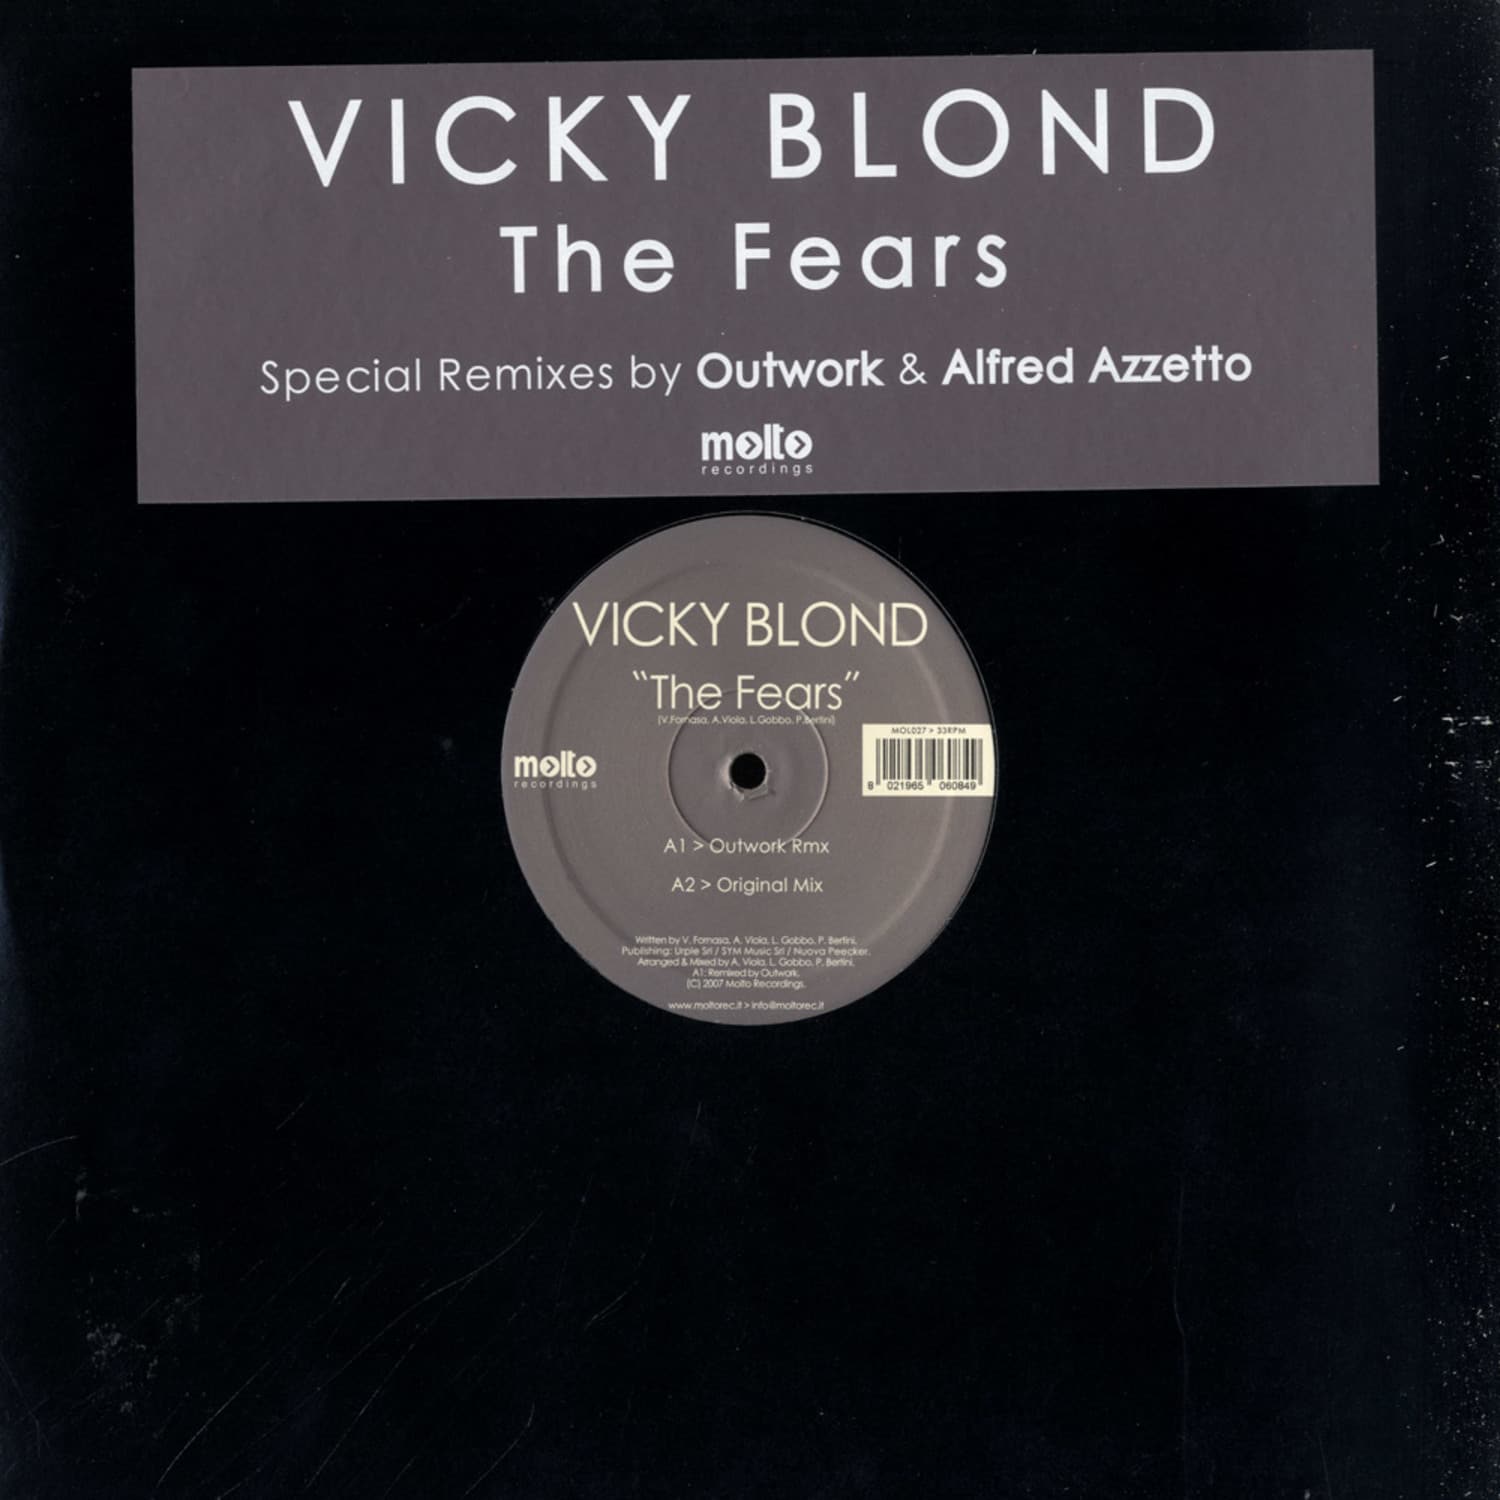 Vicky Blond - THE FEARS